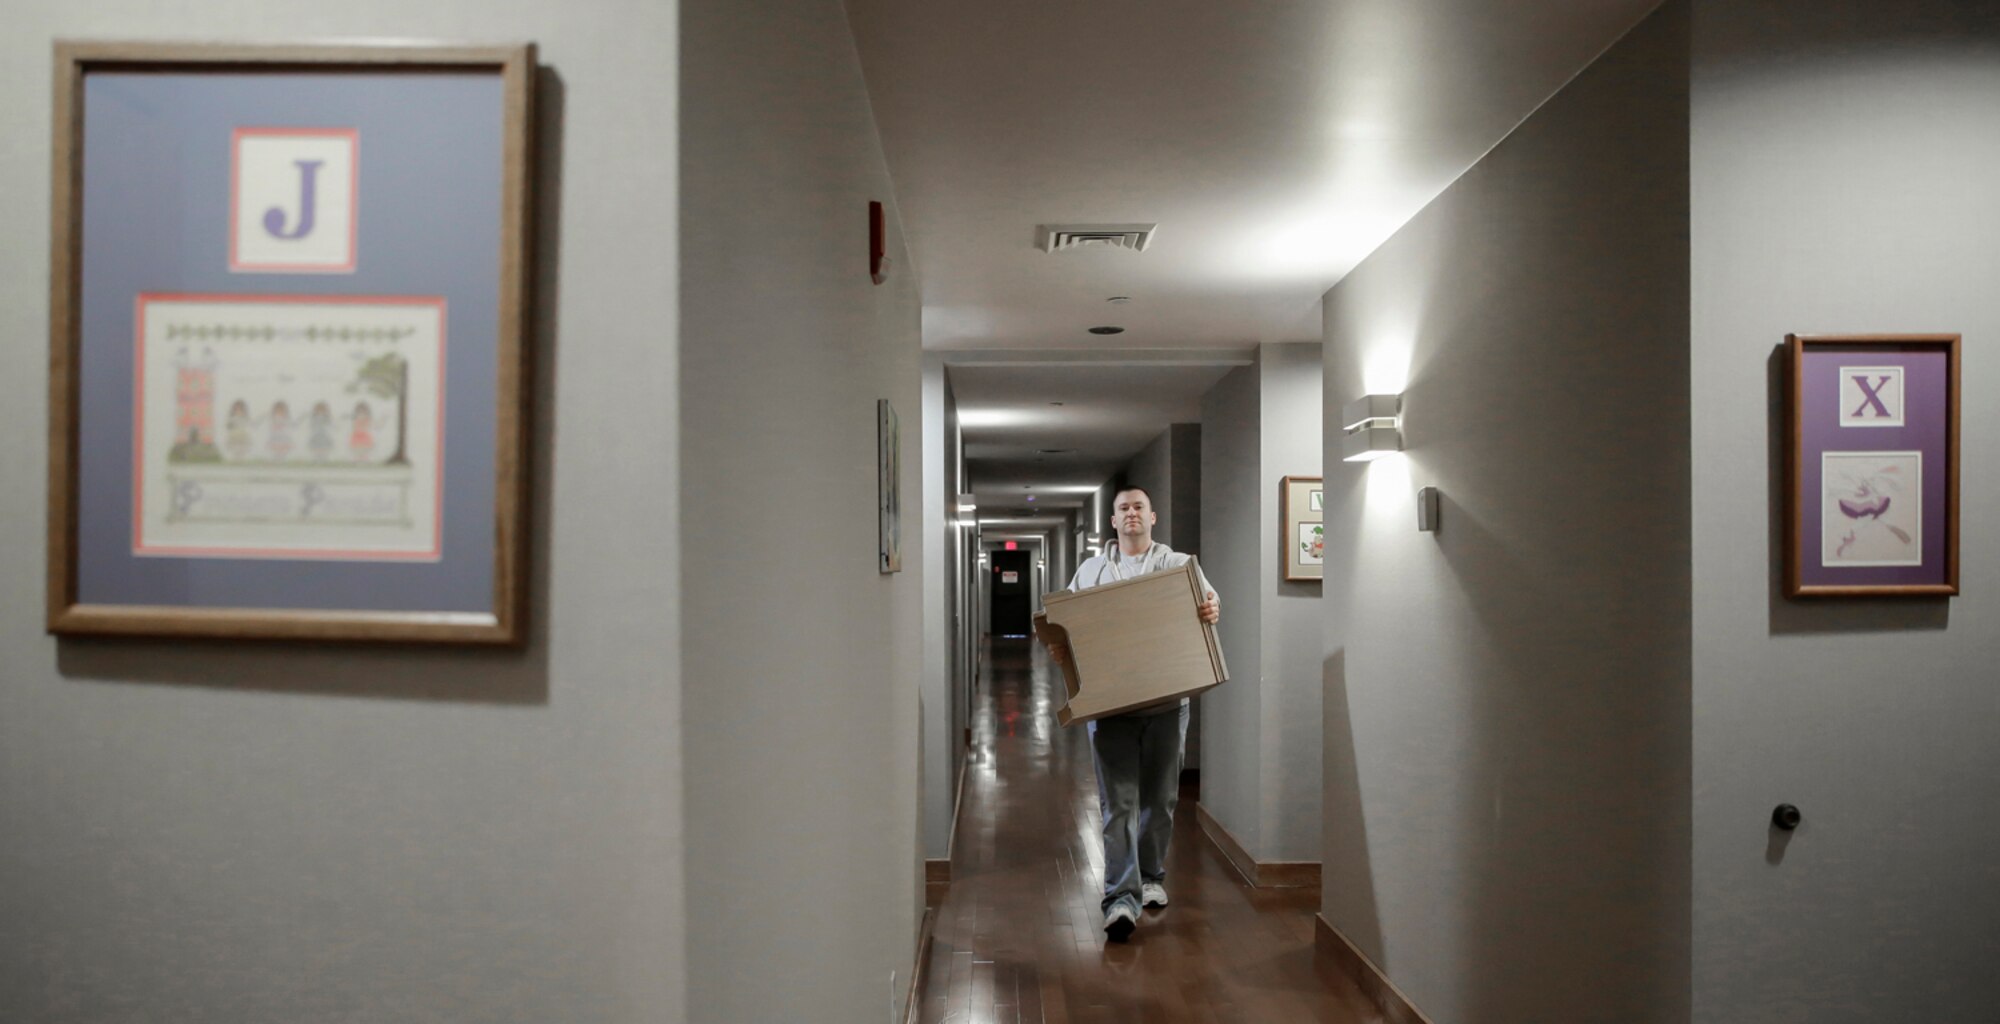 Master Sgt. Matt Wilson, 138th Civil Engineering Squadron, carries a night stand from one room to another March 29, 2015, at the Ronald McDonald House of Tulsa.  Volunteers from the 138th Fighter Wing assisted at the house upon the arrival of a large shipment new beds and mattresses. (U.S. National Guard photo by Master Sgt. Mark A. Moore/Released)